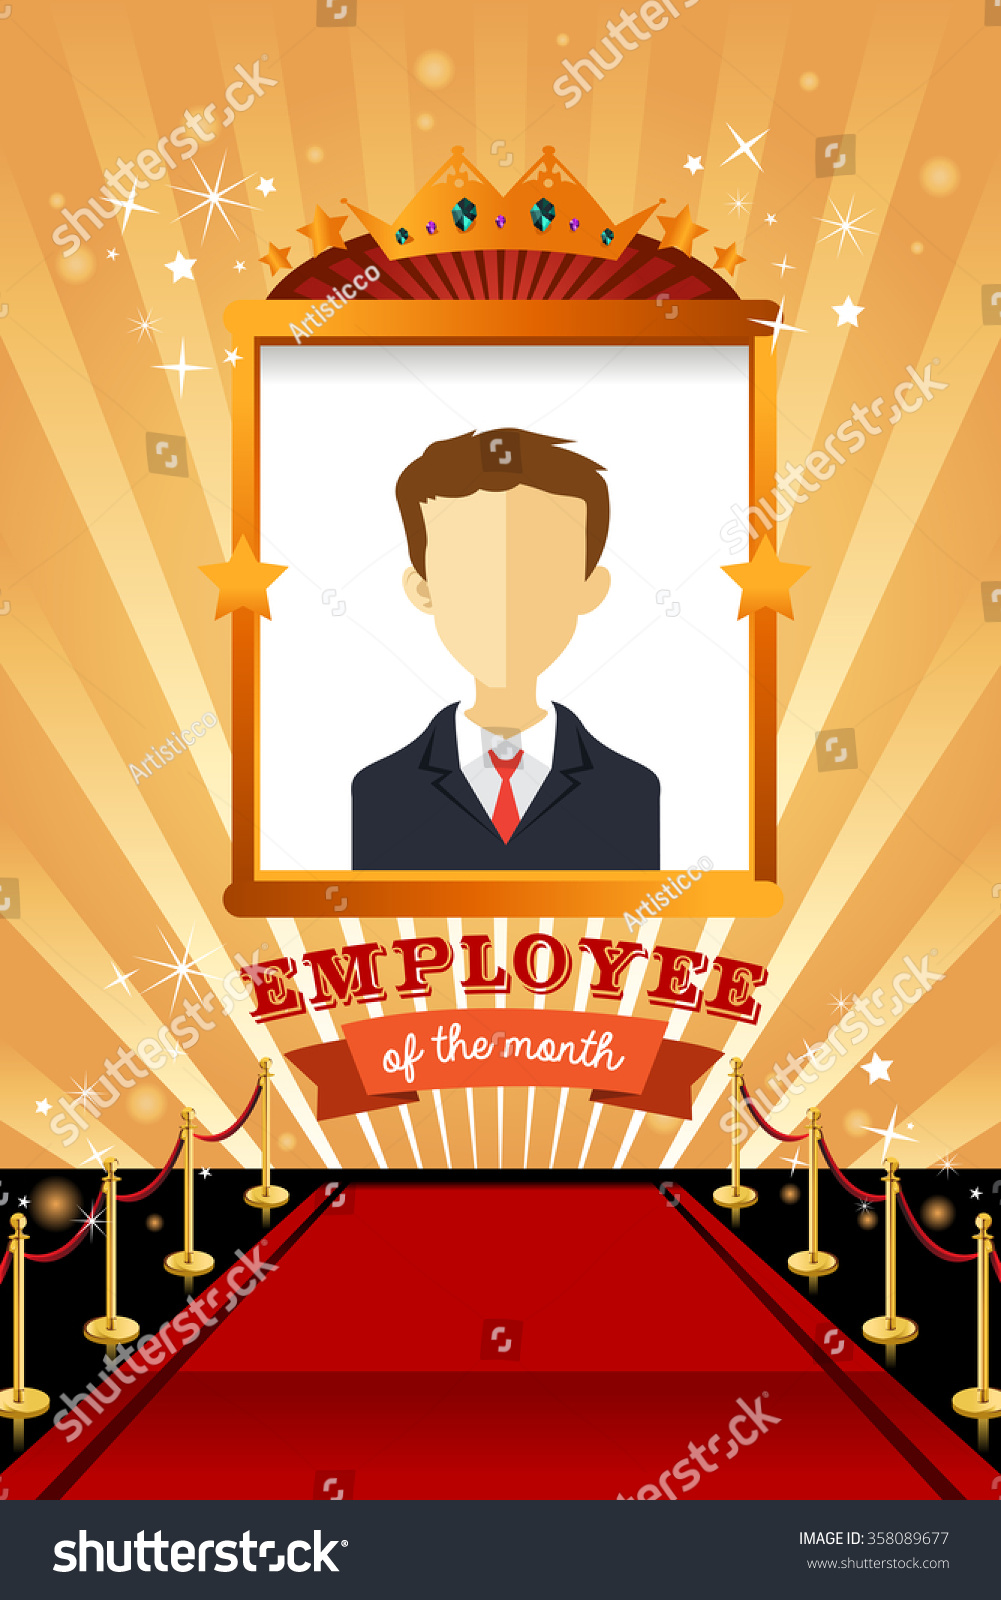 free clipart employee of the month - photo #49